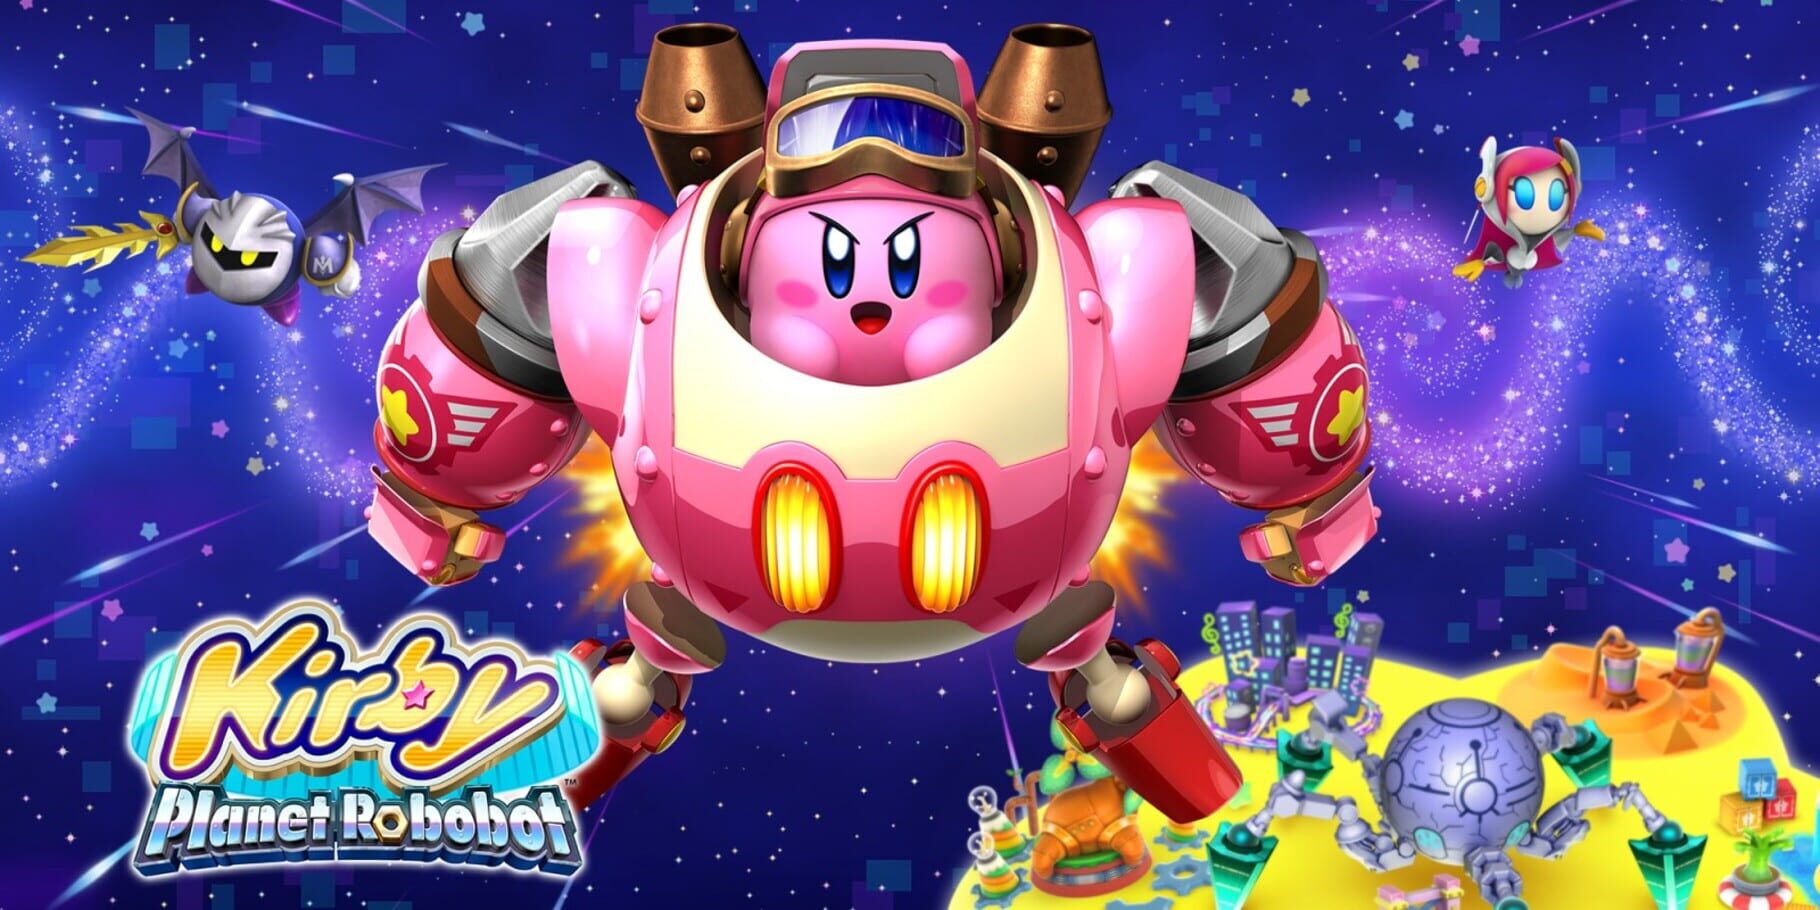 Artwork for Kirby: Planet Robobot